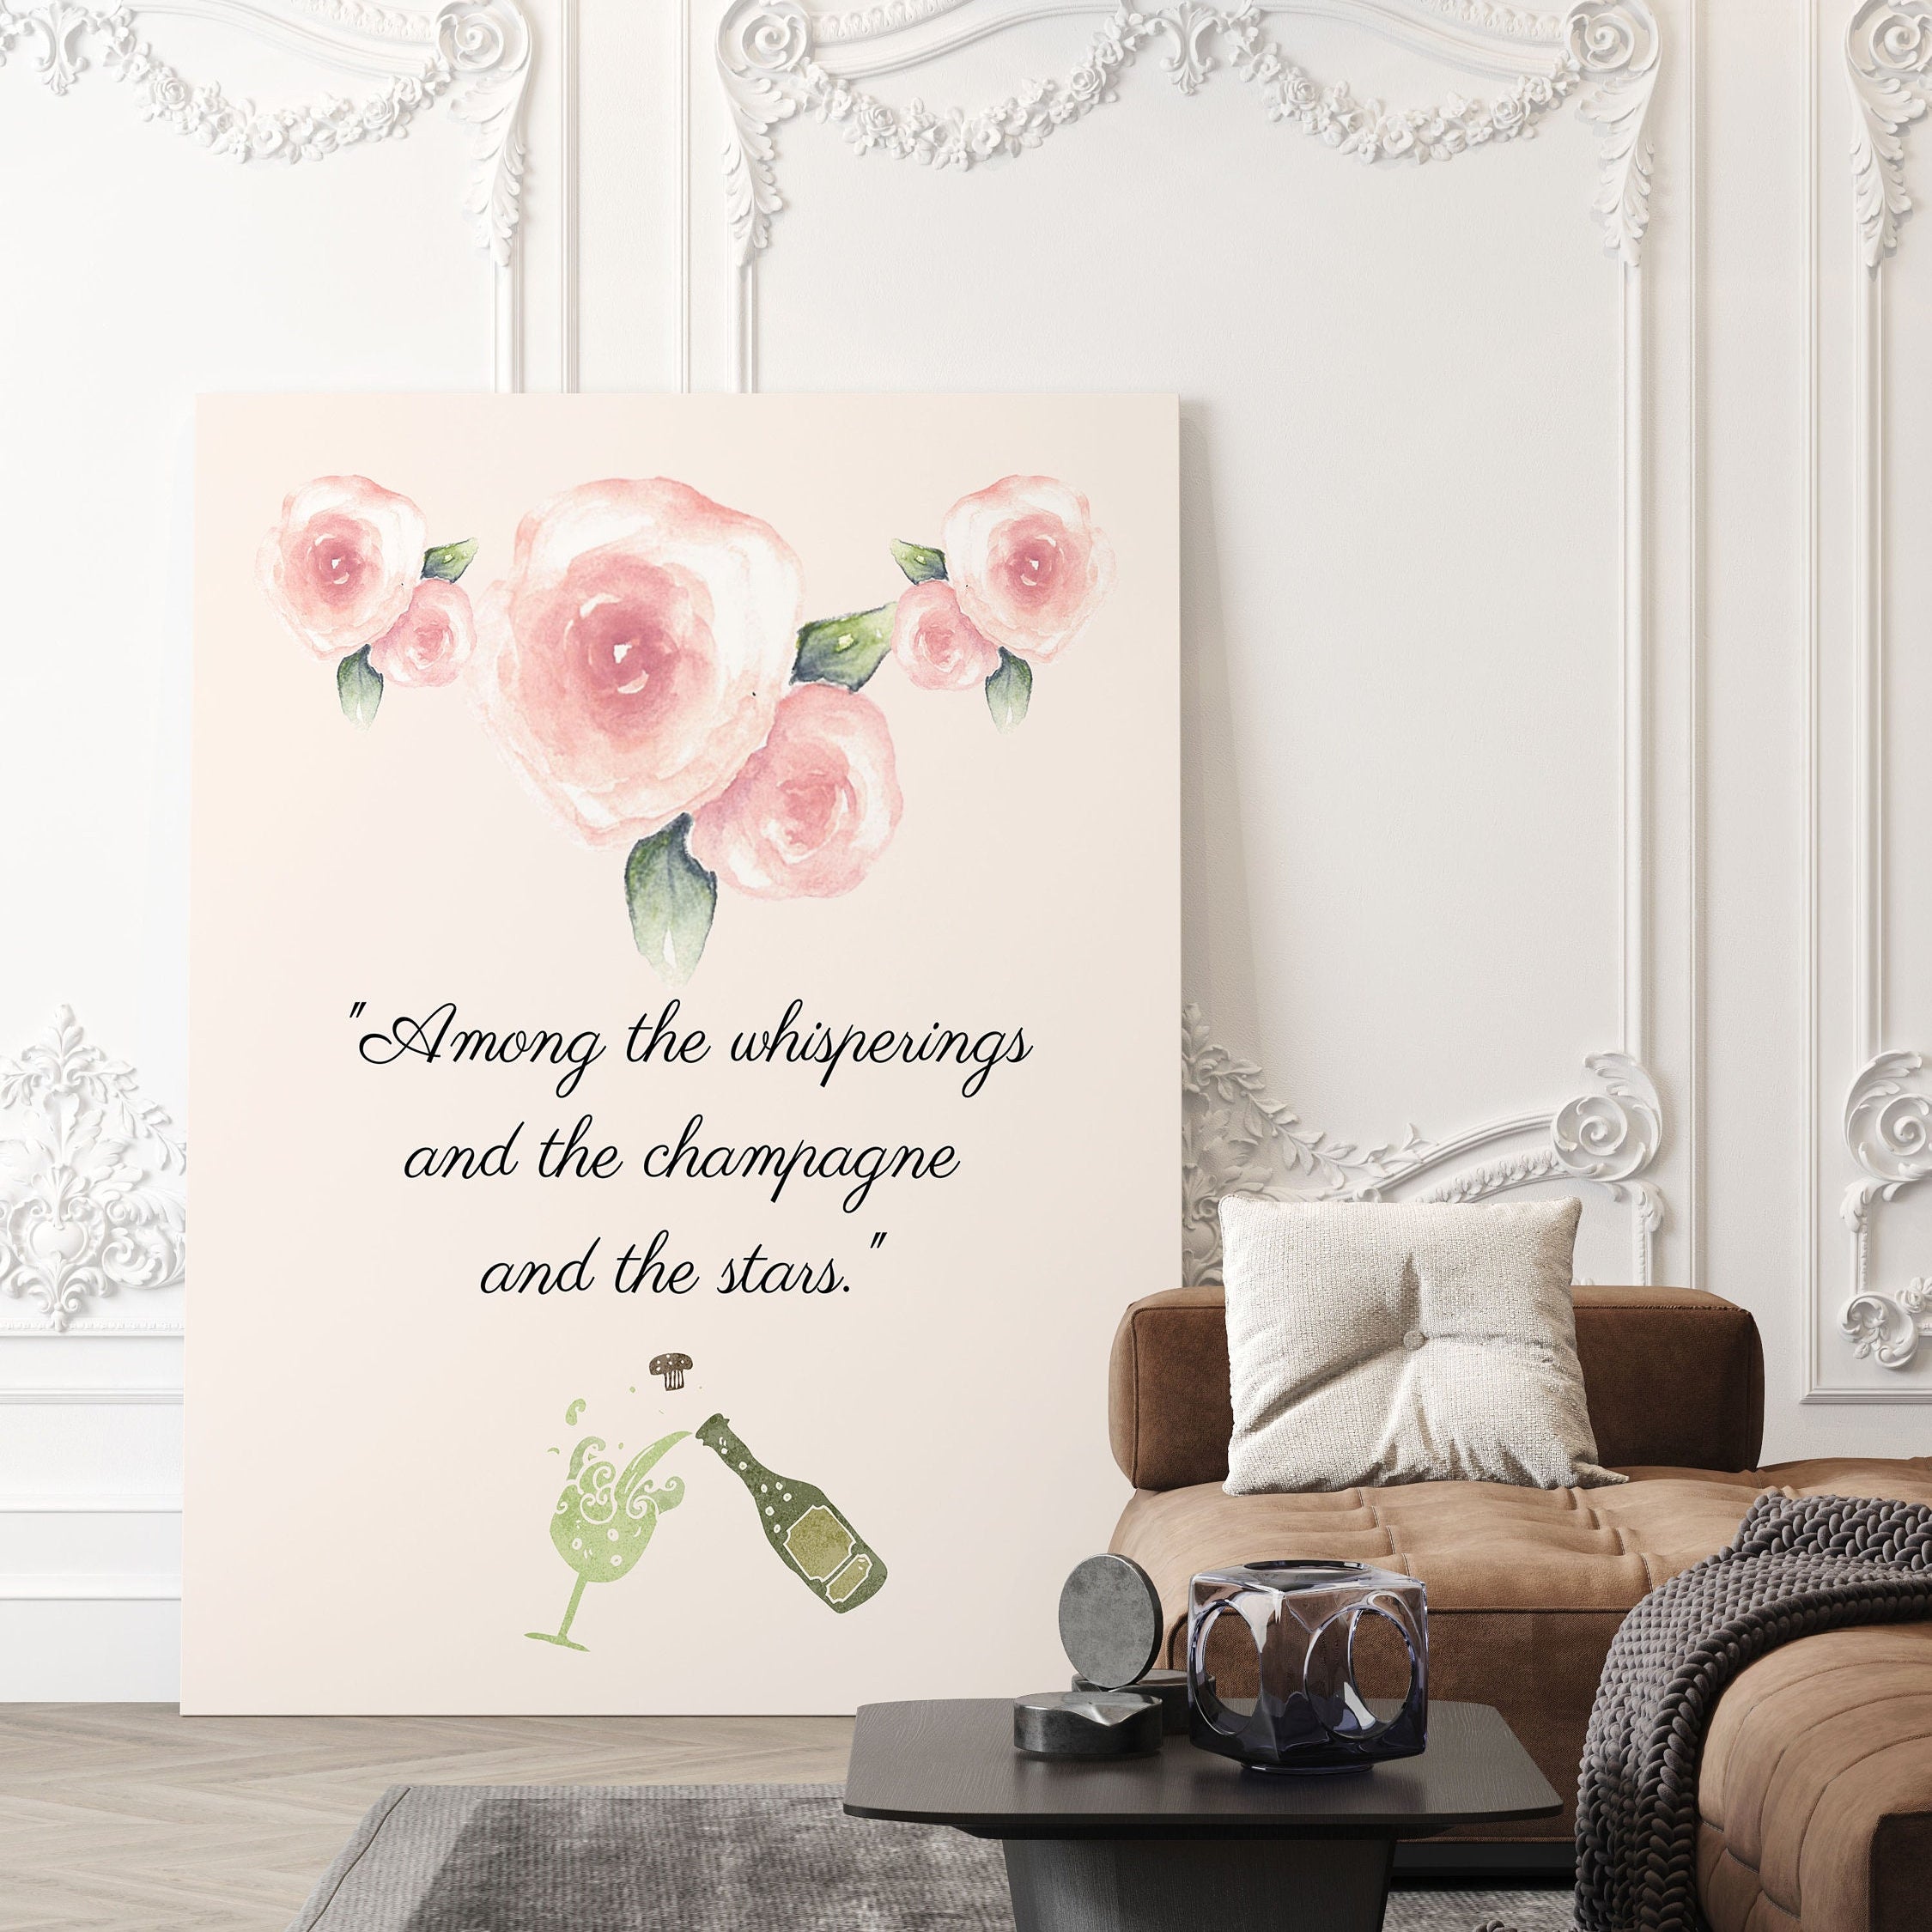 F Scott Fitzgerald Quote Champagne and Stars Great Gatsby Print in Green and Blush Pink for Living Room Decor